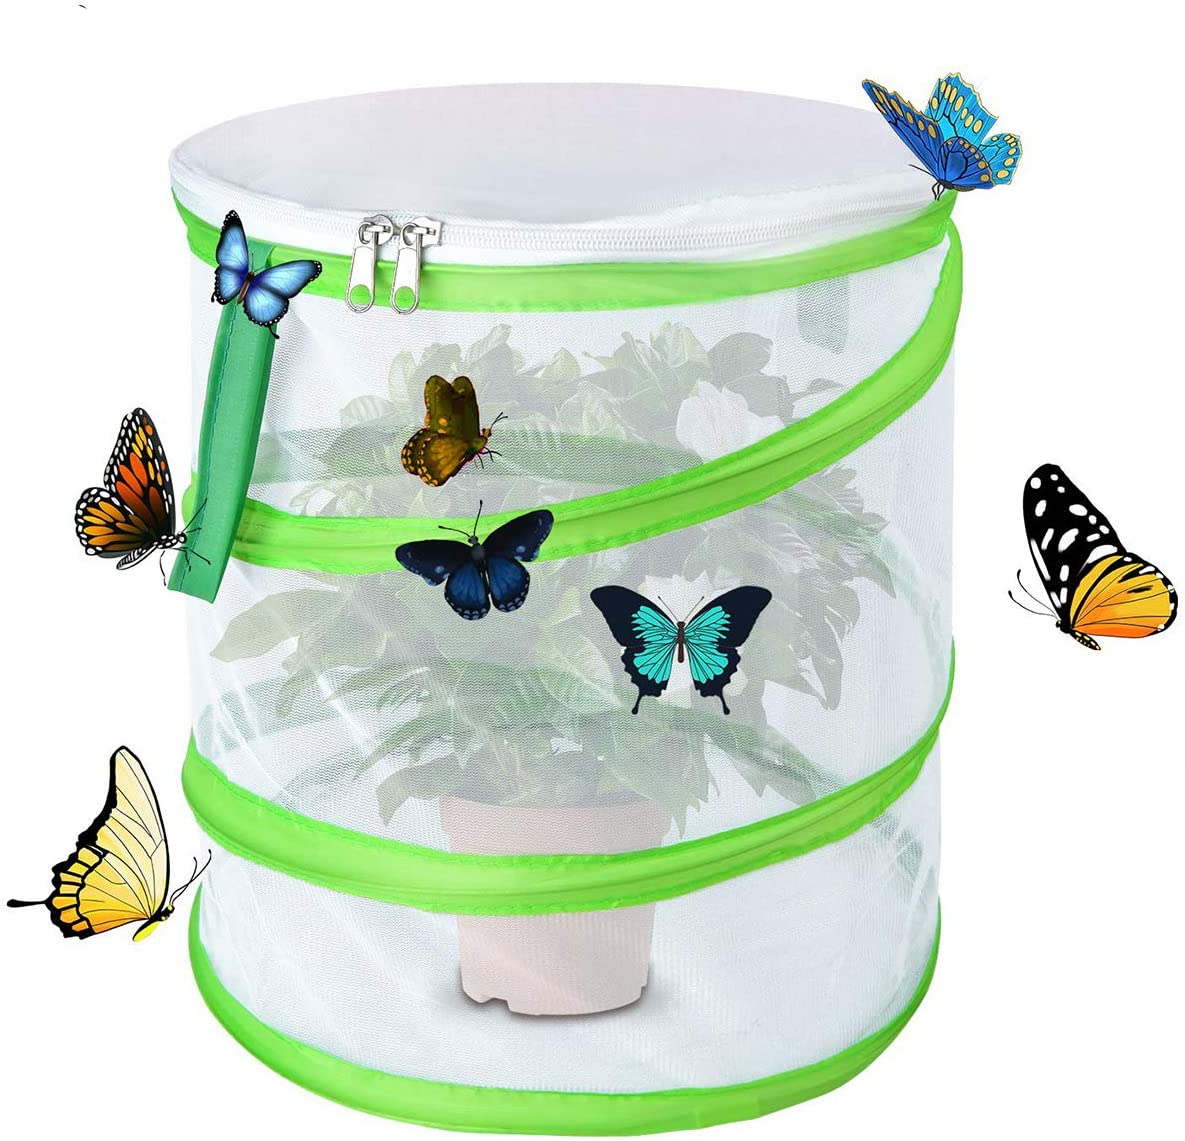 TSLBW Butterfly Habitat 14 * 15cm Collapsible Bug Catcher Net Insect and  Butterfly Habitat Cage Pop Up Design Collapsible Insect Mesh Cage Insect  Cage Round Pop Up Mesh Net for Science Education 